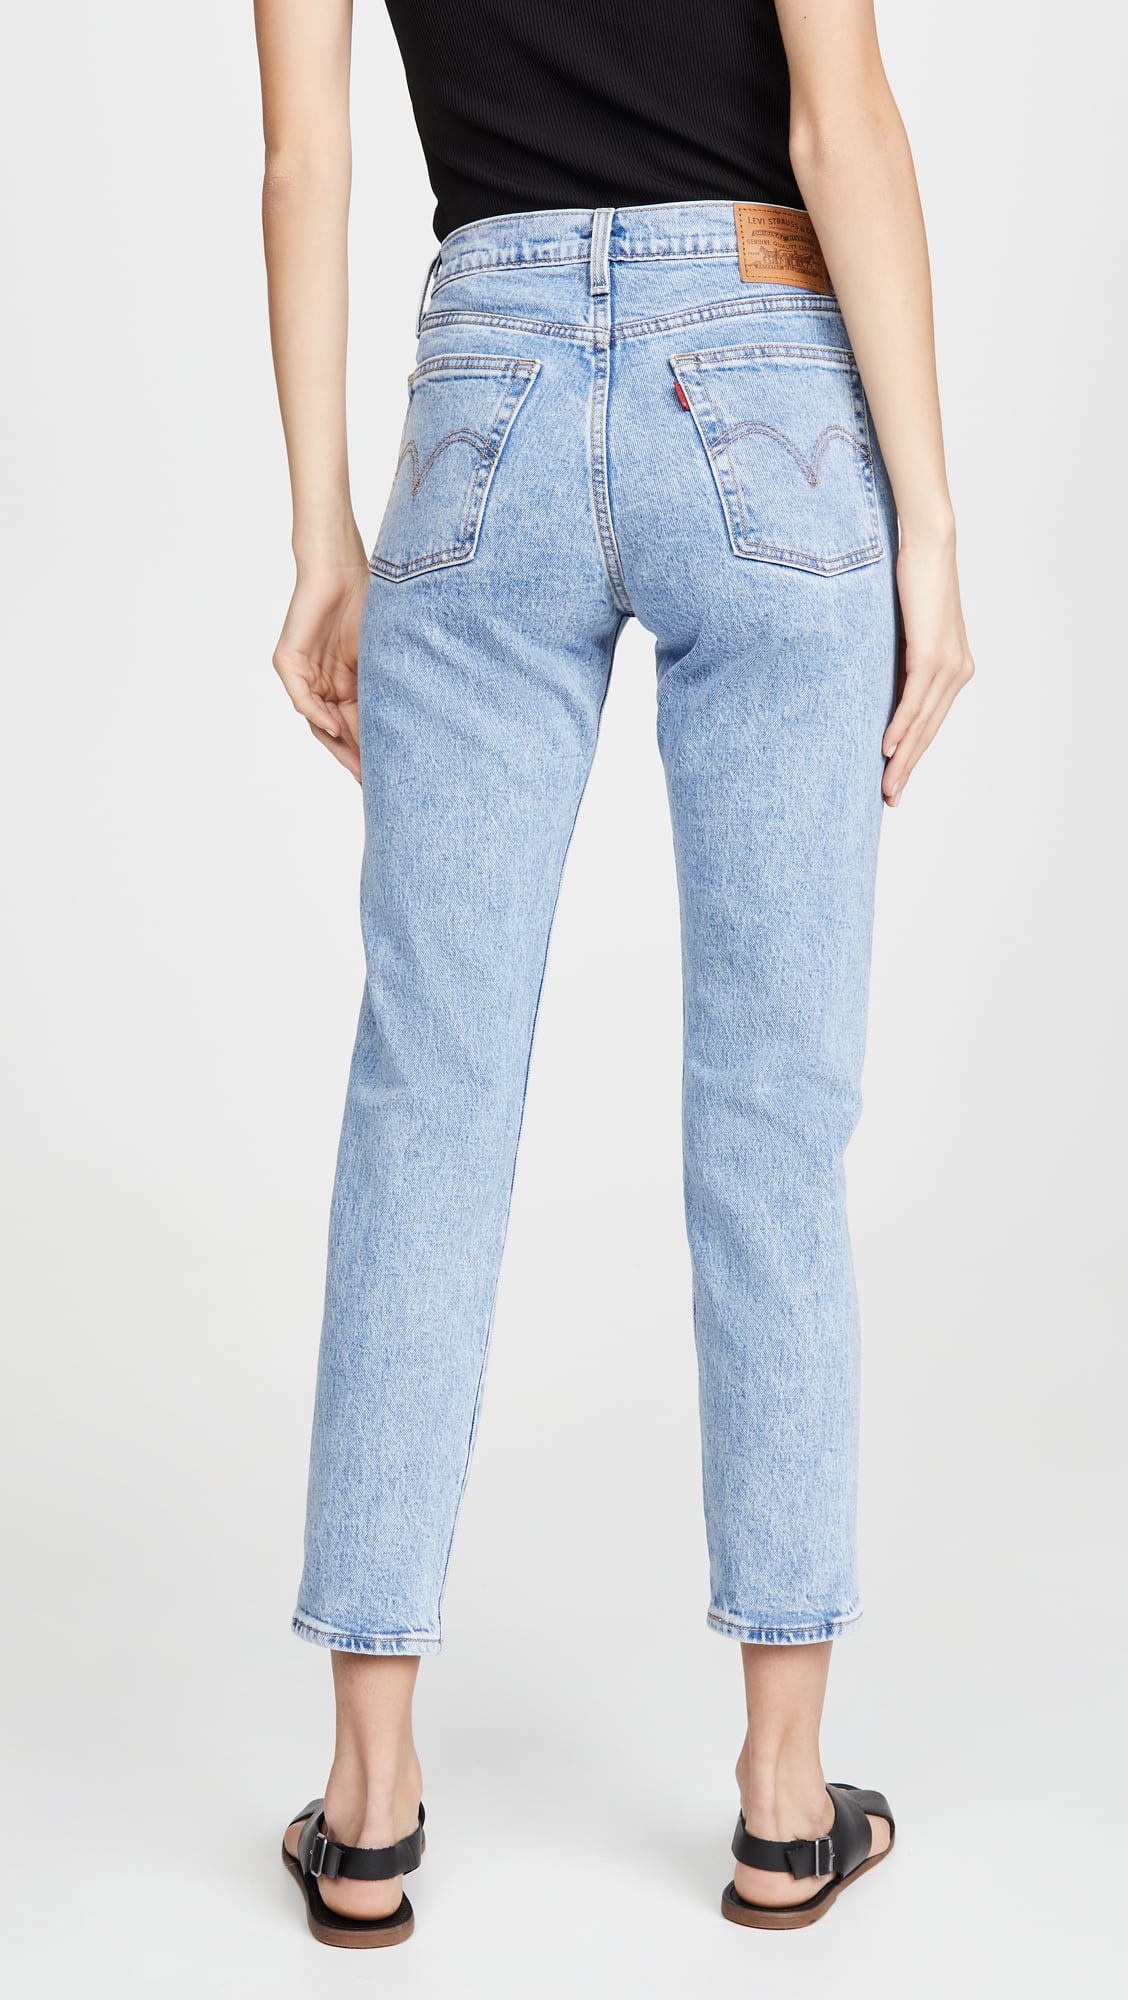 Levi's Wedgie Icon Fit Jeans | peacecommission.kdsg.gov.ng